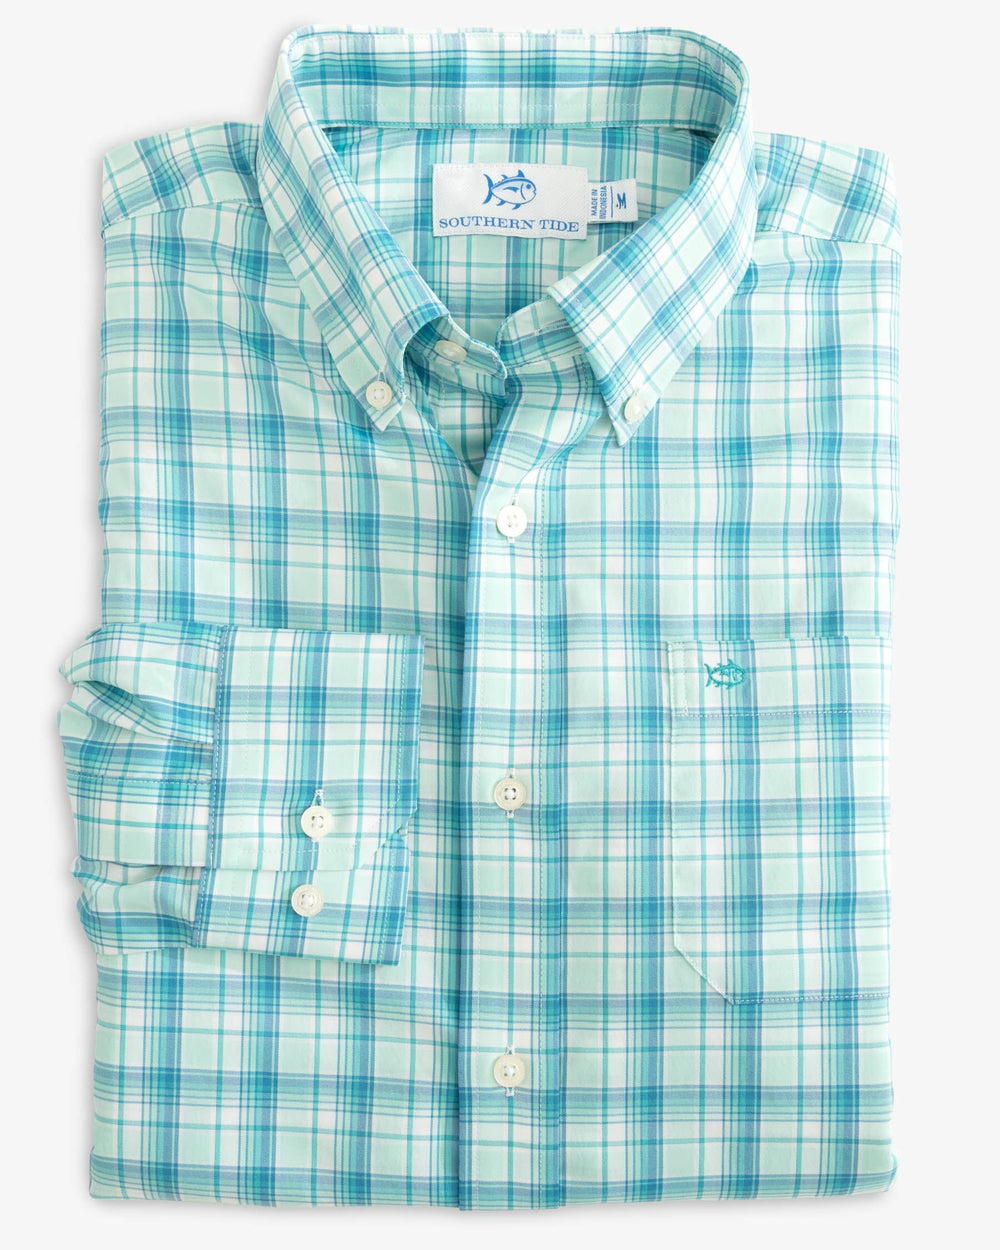 The folded view of the Southern Tide brrr Tidepointe Plaid Intercoastal Sport Shirt by Southern Tide - Baltic Teal